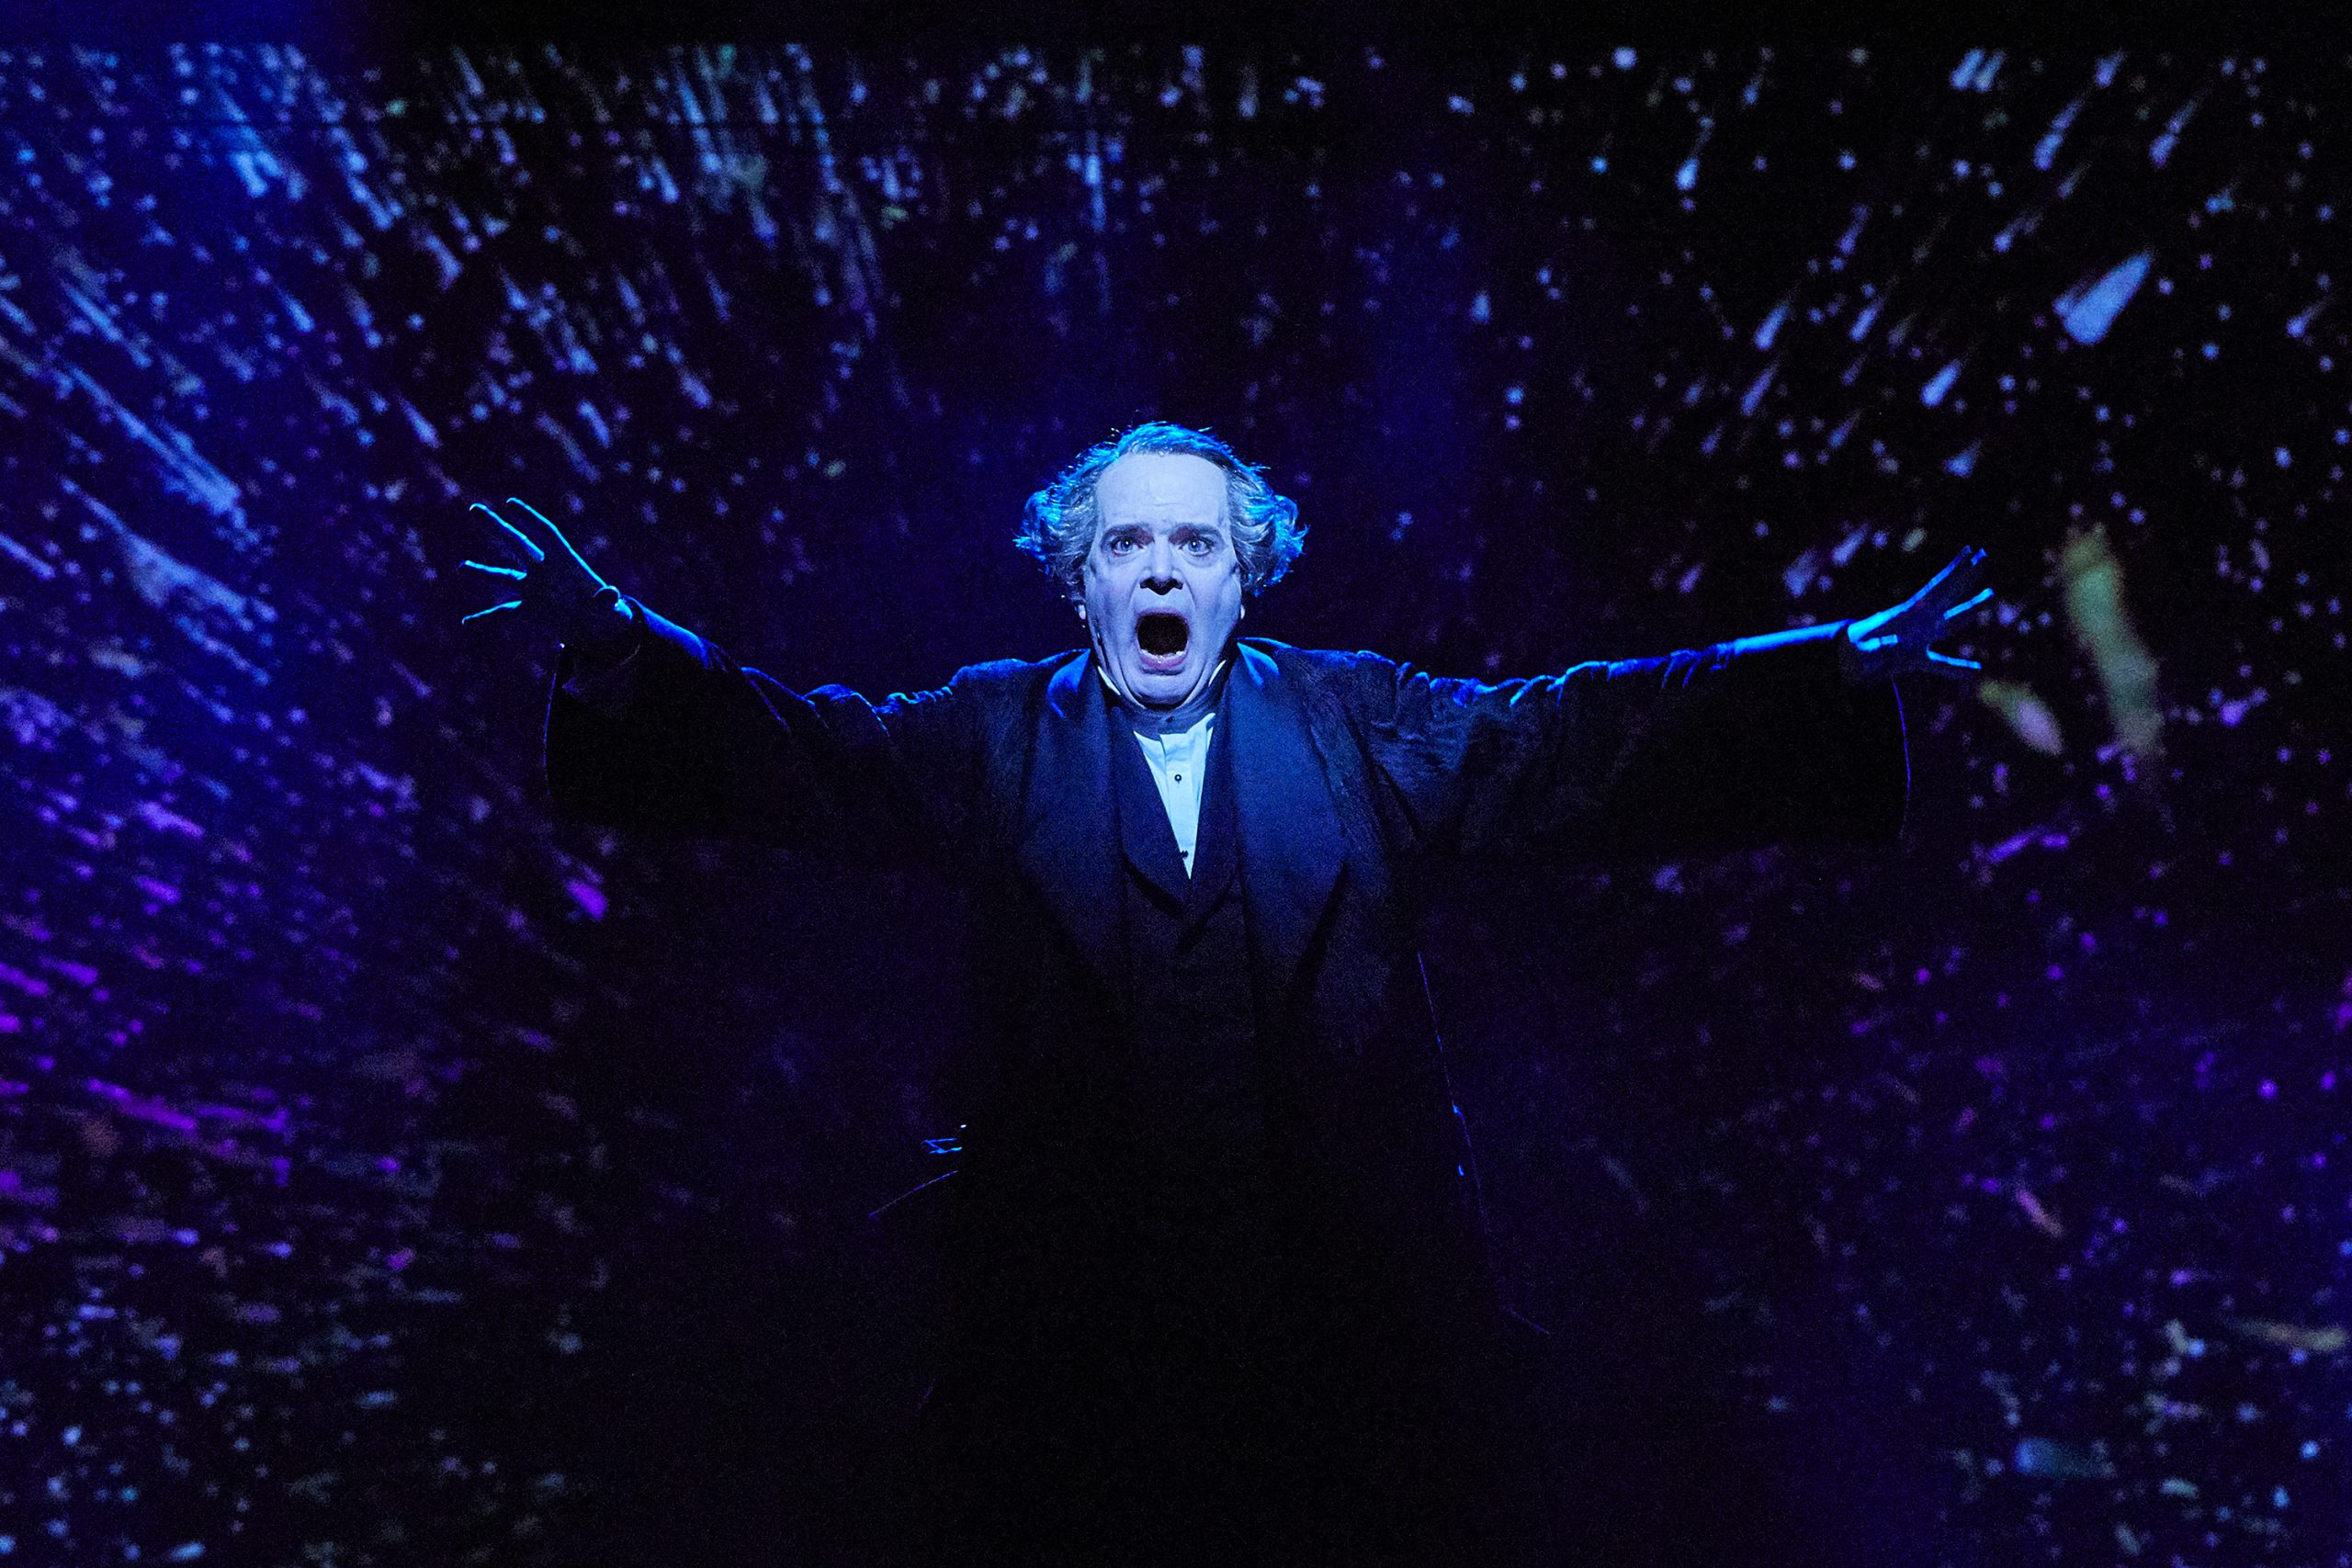 Tony Award winner Jefferson Mays in Charles Dickens’ A CHRISTMAS CAROL, directed by Michael Arden, adapted by Mays, Susan Lyons, and Arden, and conceived by Arden and Tony Award nominee Dane Laffrey, streaming November 28 – January 3; photo by Chris Whitaker.